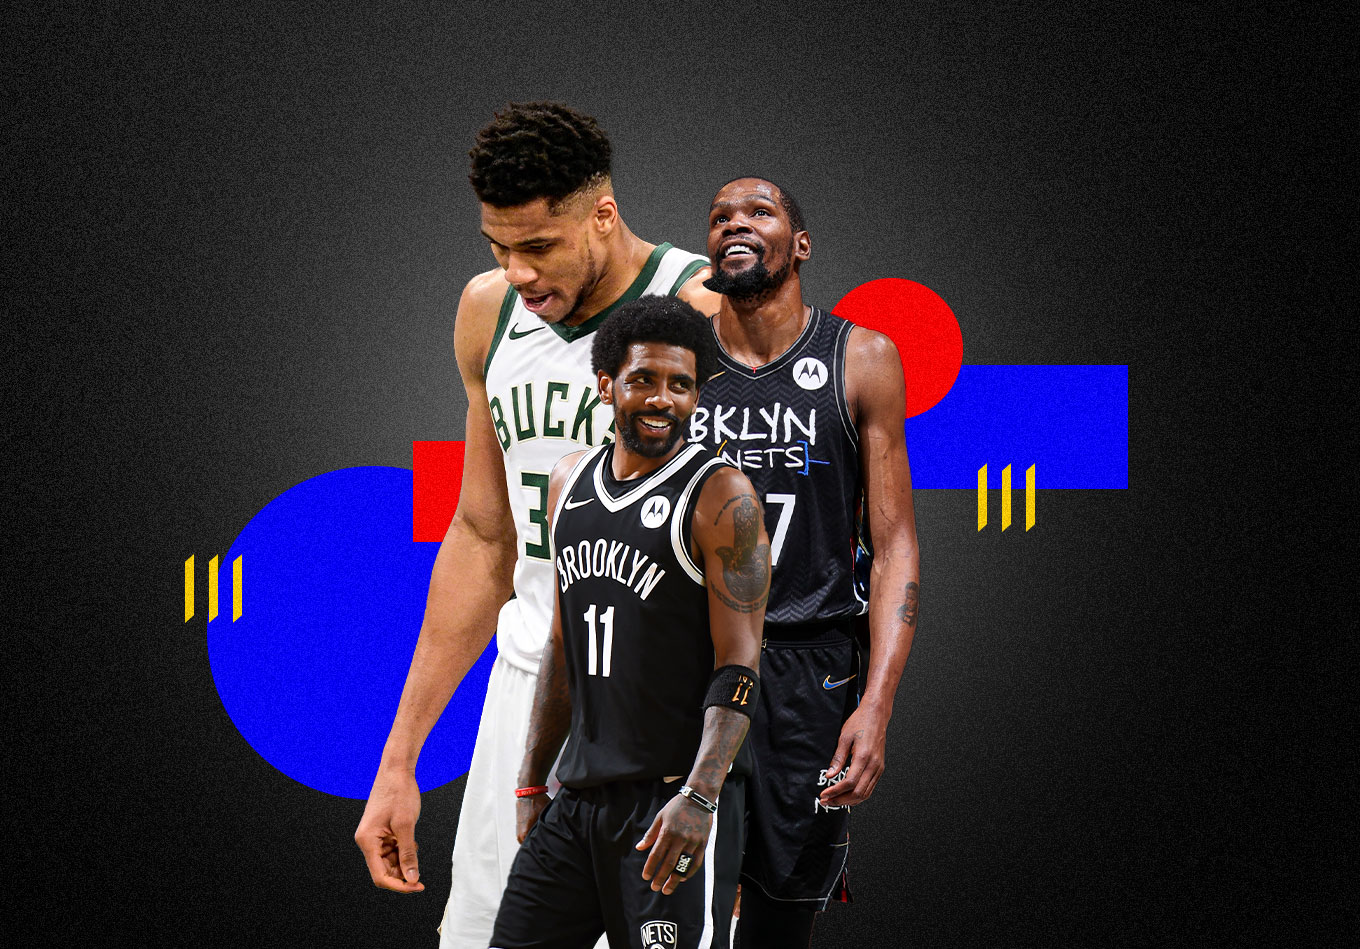 Deer in Headlights: How Loaded Brooklyn Is Helping Giannis, Milwaukee Fall Into Old Habits